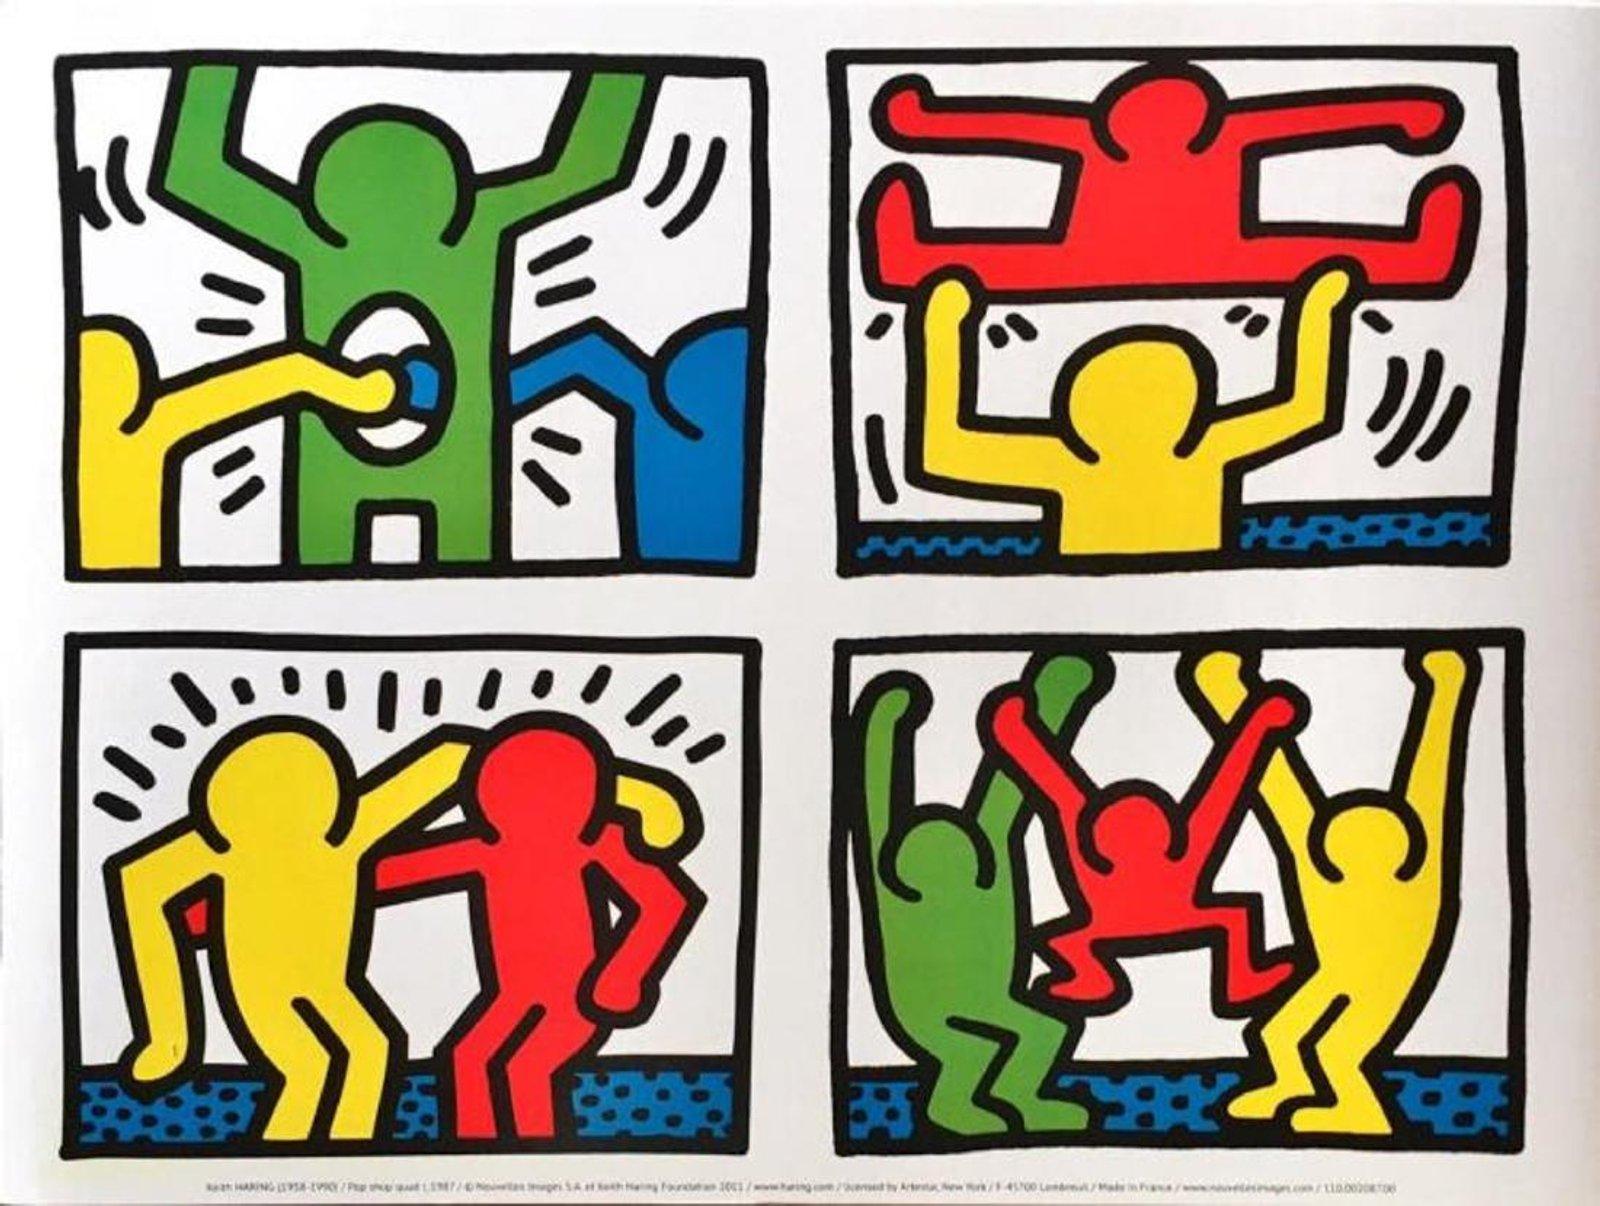 Two pristine lithographs after original screenprints by Keith Haring (May 4, 1958-Feb. 16, 1990). Bridging the gap between the art world and the street, Keith Haring rose to prominence in the early 1980s with his graffiti drawings made in the